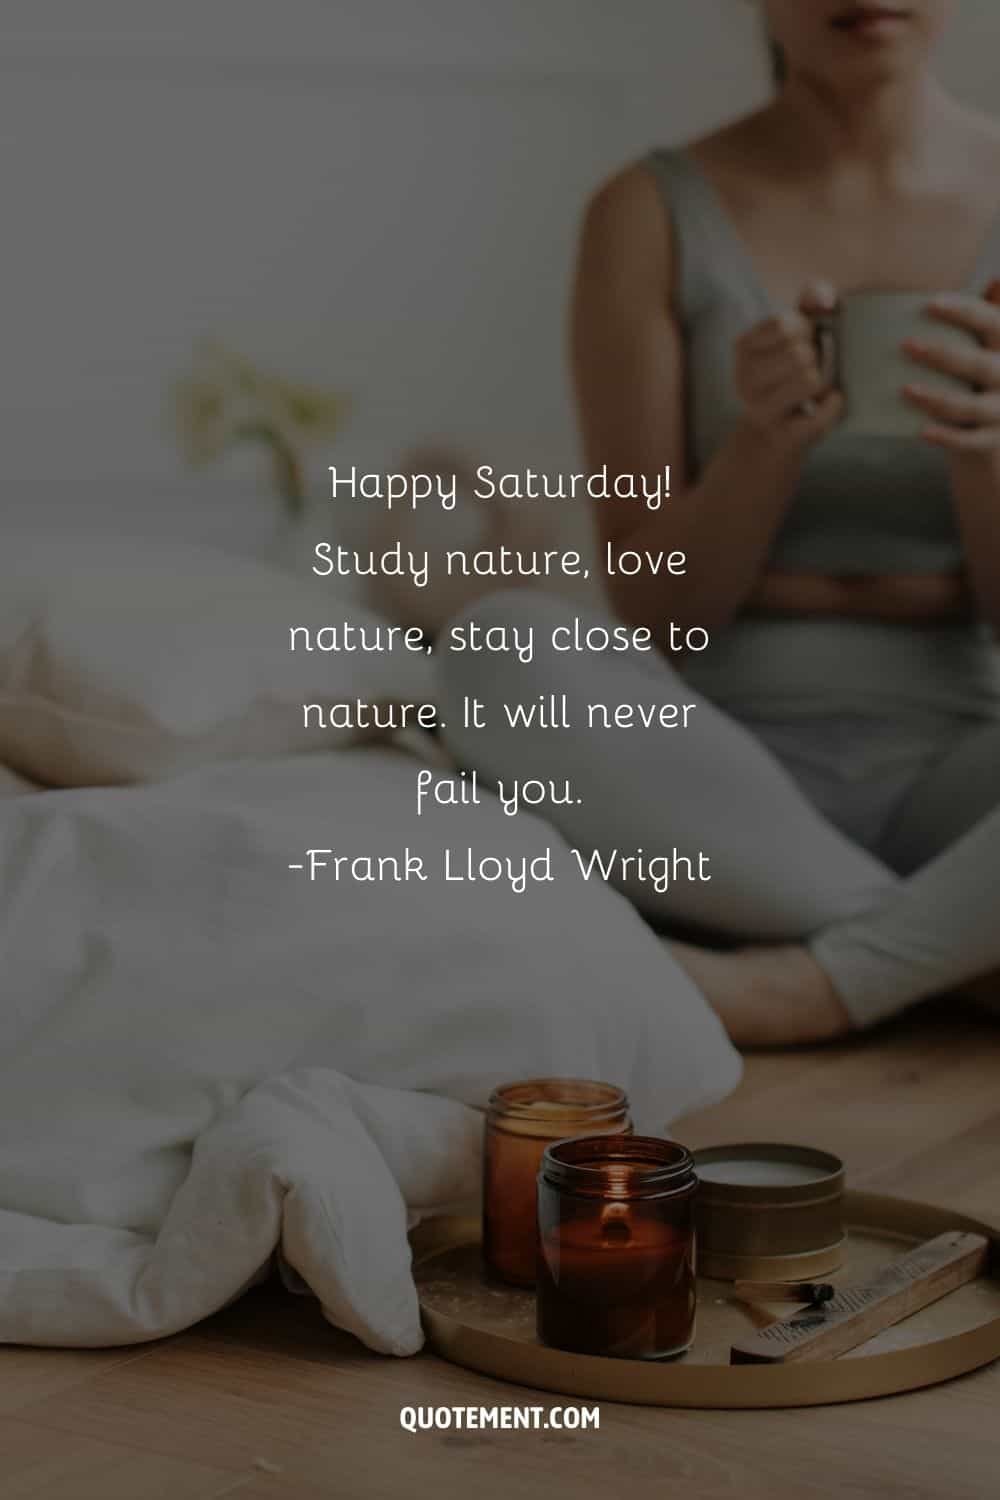 a woman holding a coffee mug image representing exquisite Saturday motivation quote